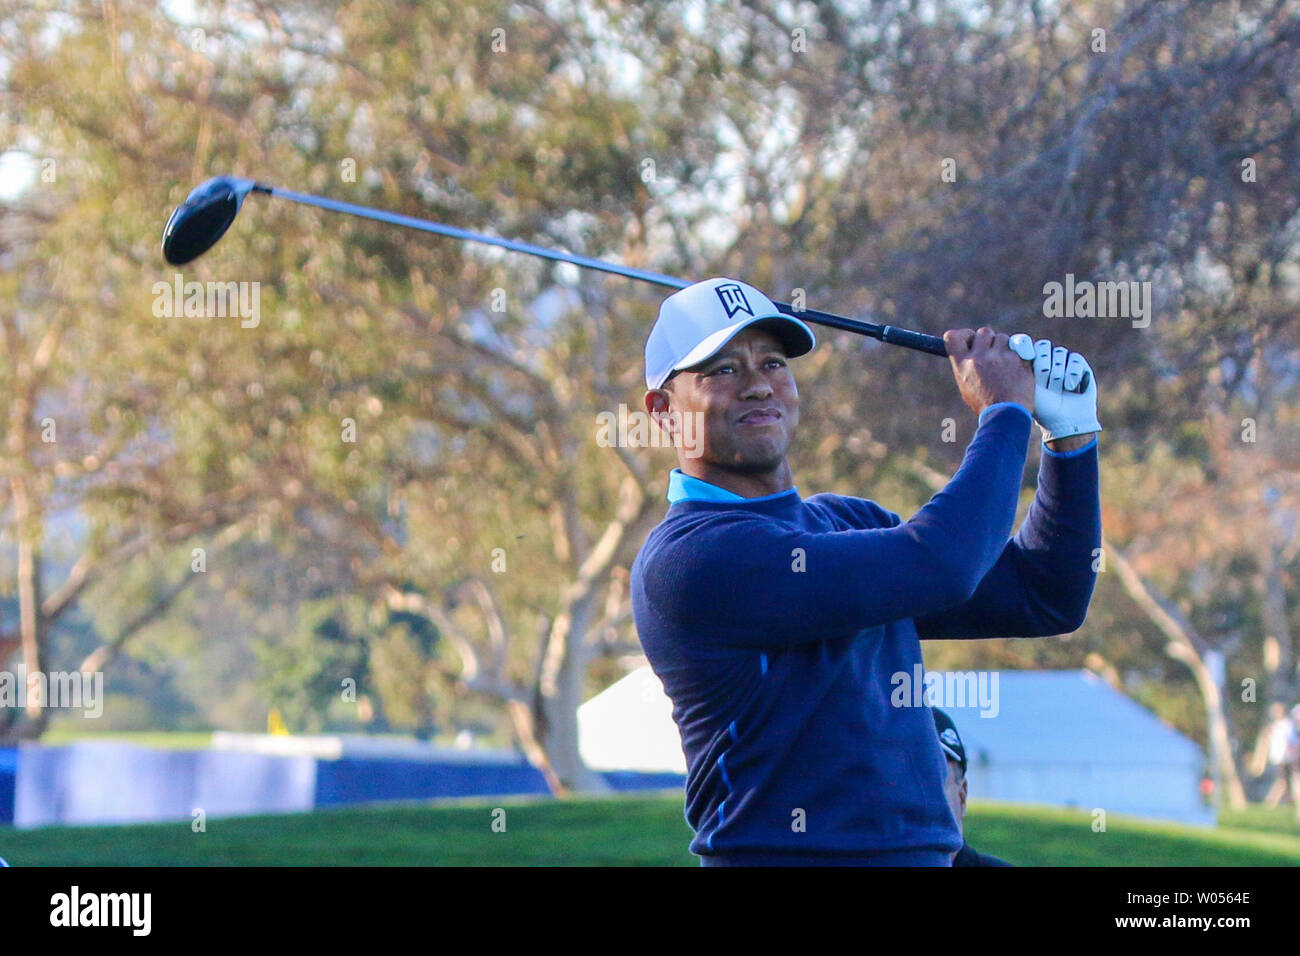 Tiger Woods tees off on the 6th hole during the Pro-Am round of the Farmers Insurance Open at Torrey Pines in La Jolla, California on January 24, 2018.  Woods, the former No. 1 golfer in the world, will be making his first start in a PGA tournament in a year.  He says he wants to play a full schedule to be ready for The Masters.   Photo by Howard Shen/UPI Stock Photo